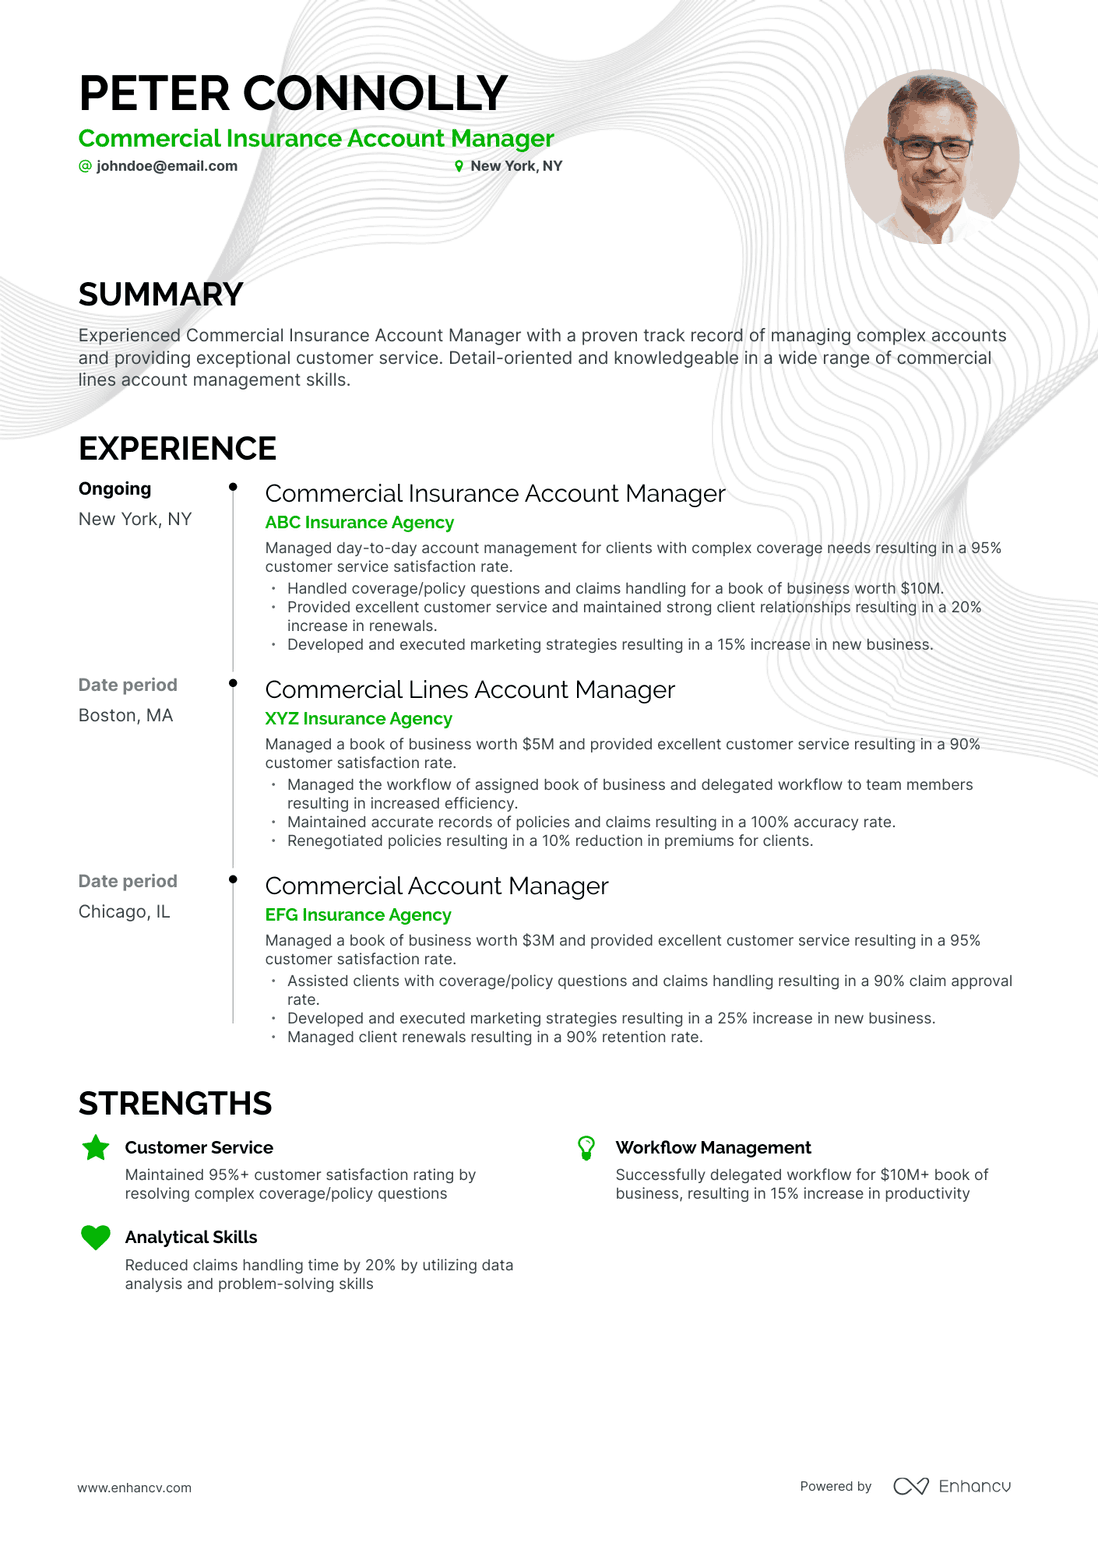 Timeline Commercial Account Manager Resume Template